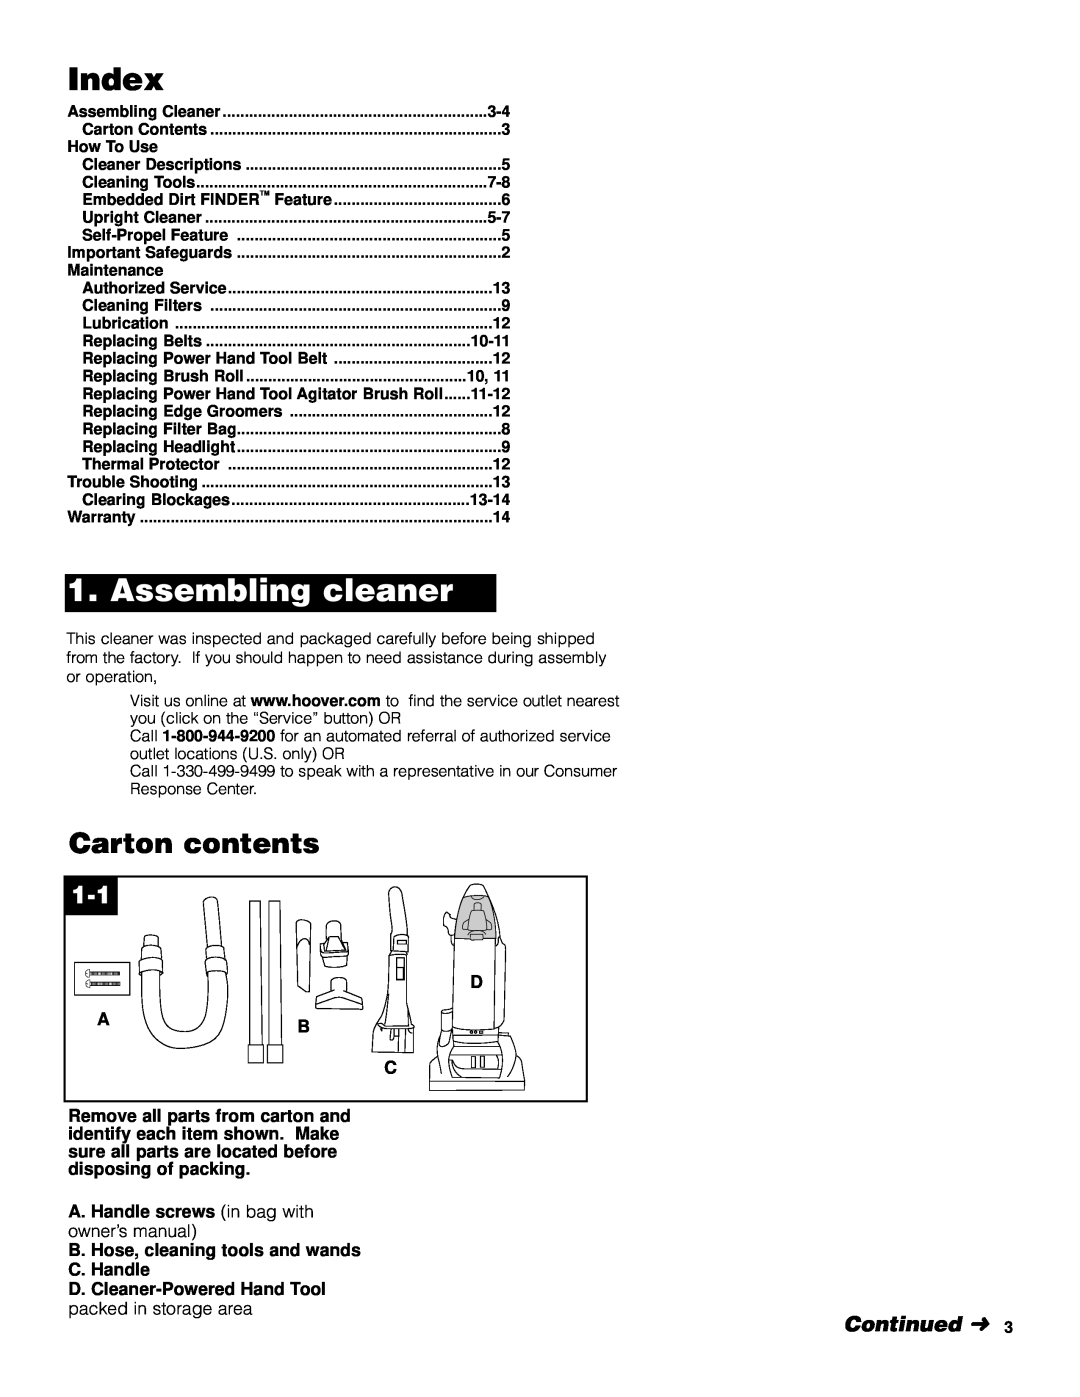 Hoover UH70600 manual Index, Carton contents, Continued, A. Handle screws in bag with, D. Cleaner-Powered Hand Tool 